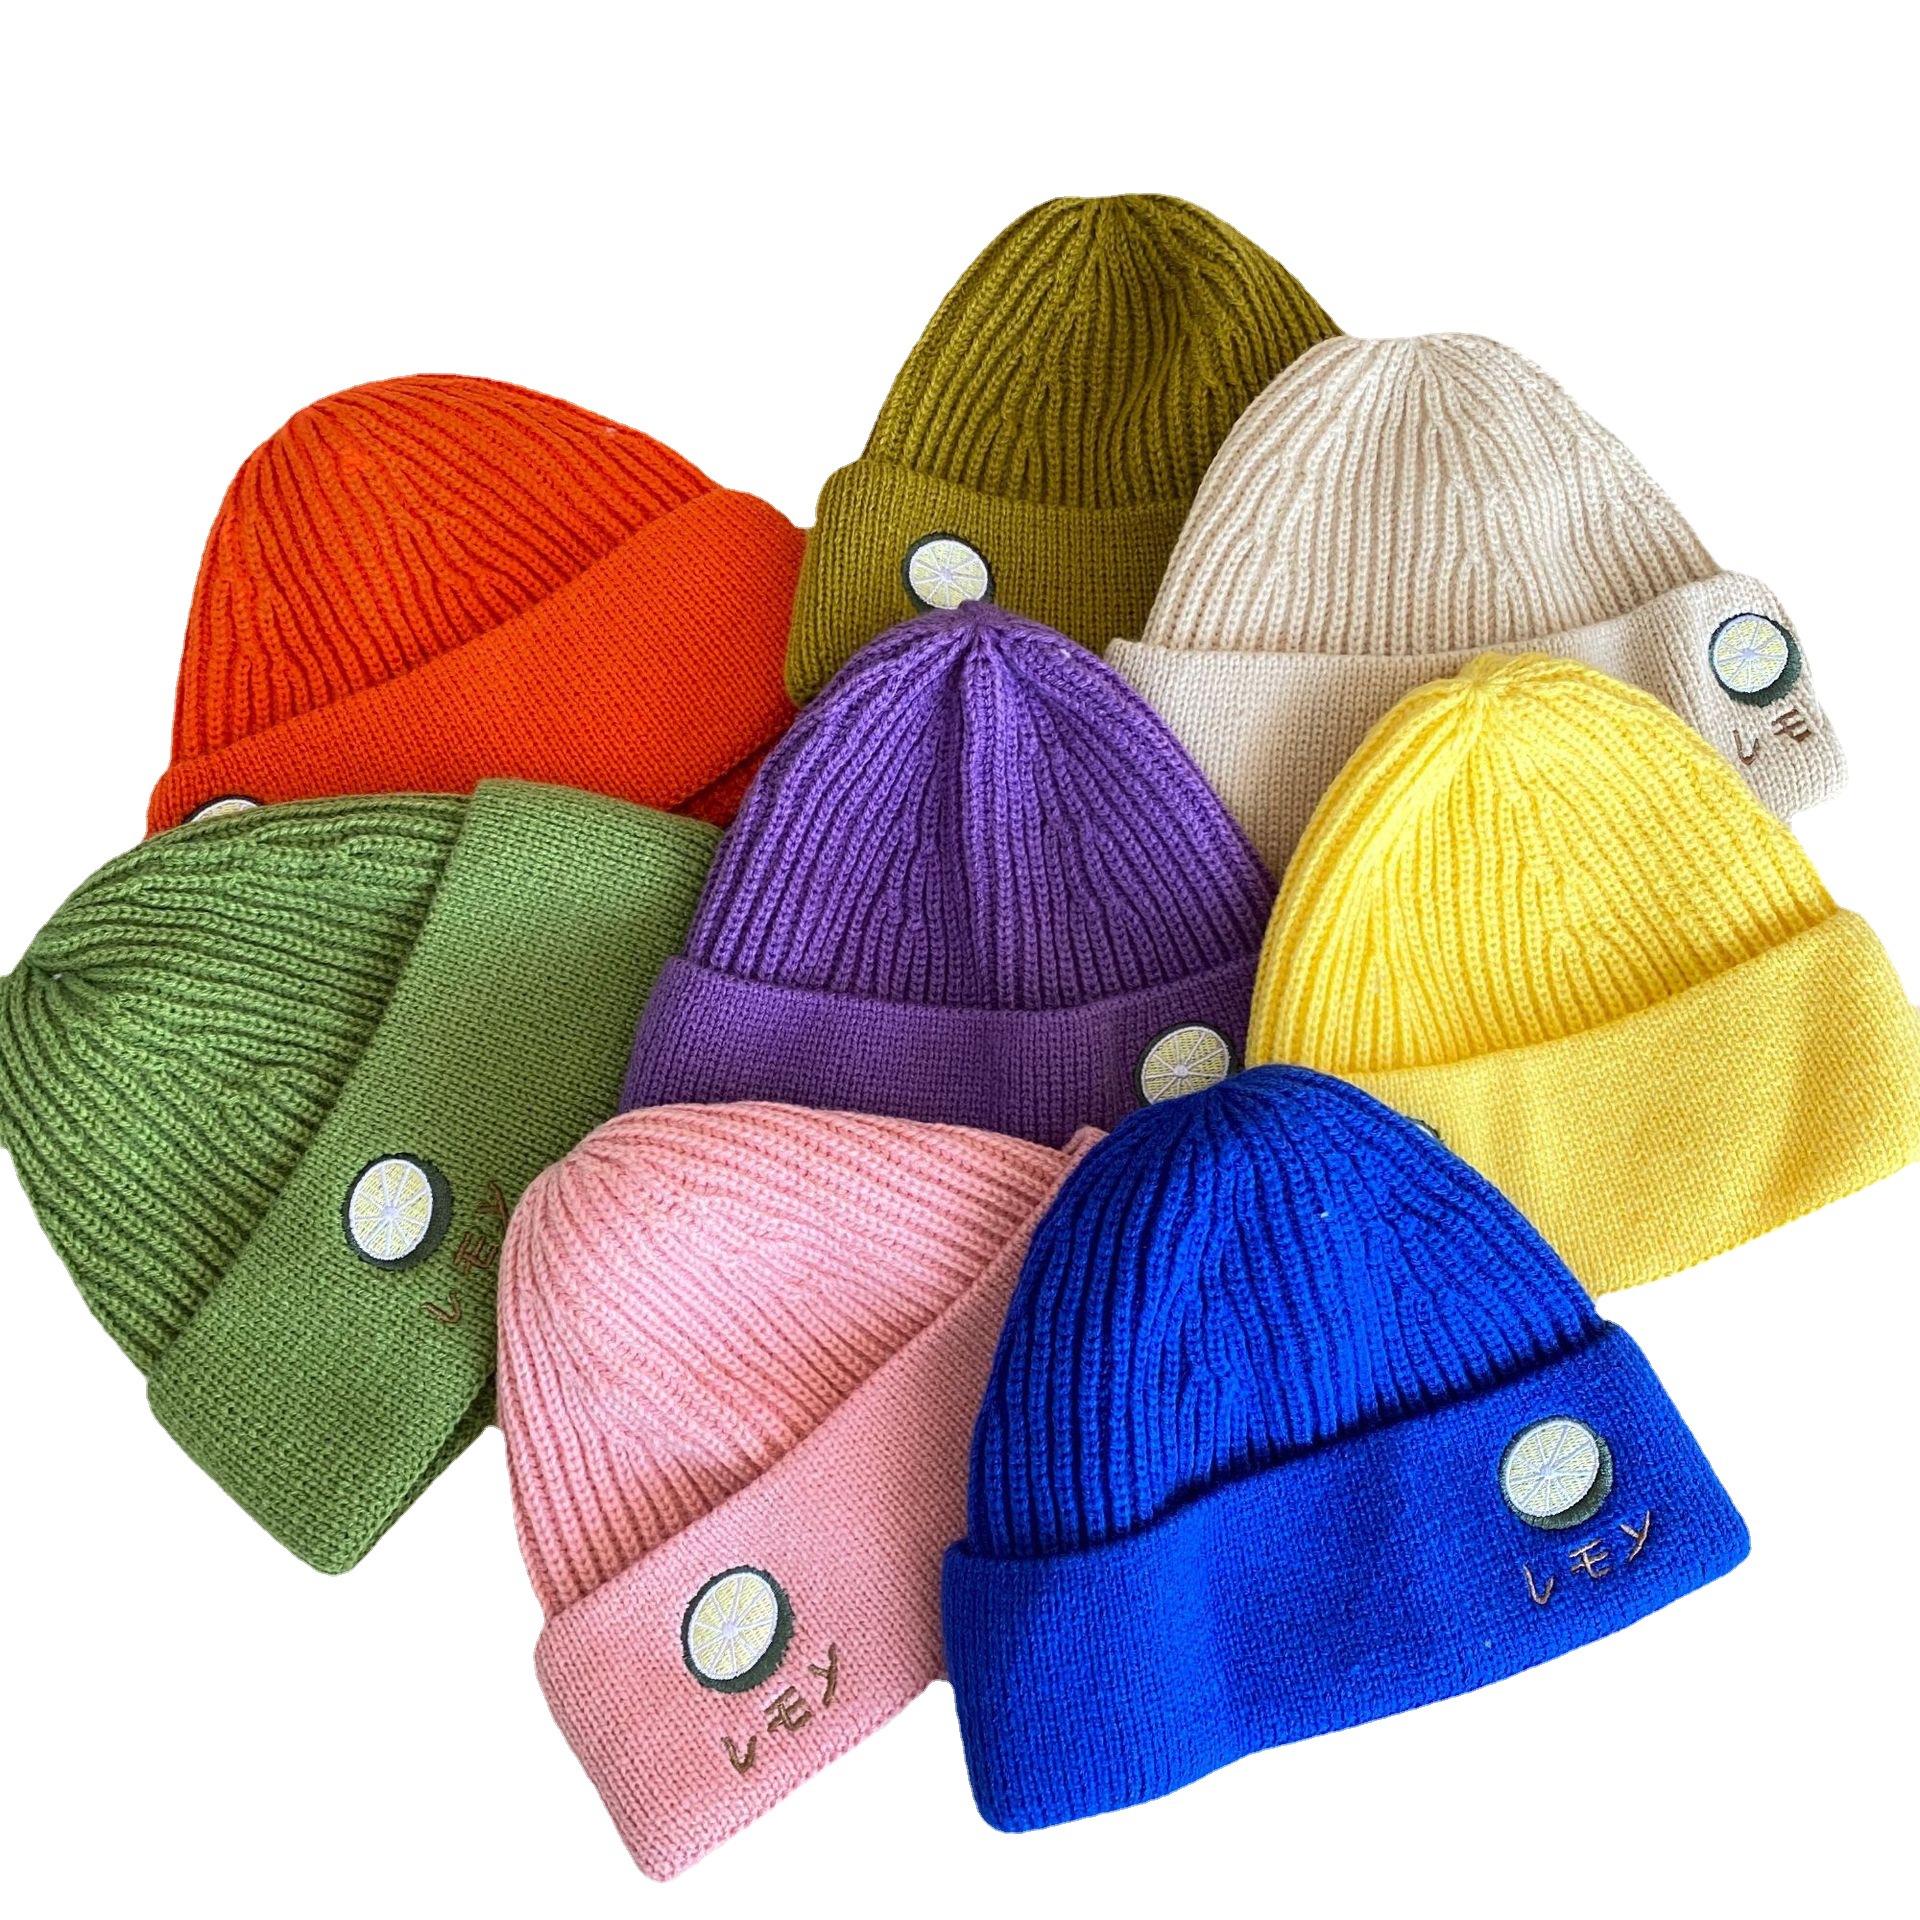 Wool hat couple autumn and winter new lemon cartoon embroidery bag head hat warm knitted hat tide men's winter cold cap